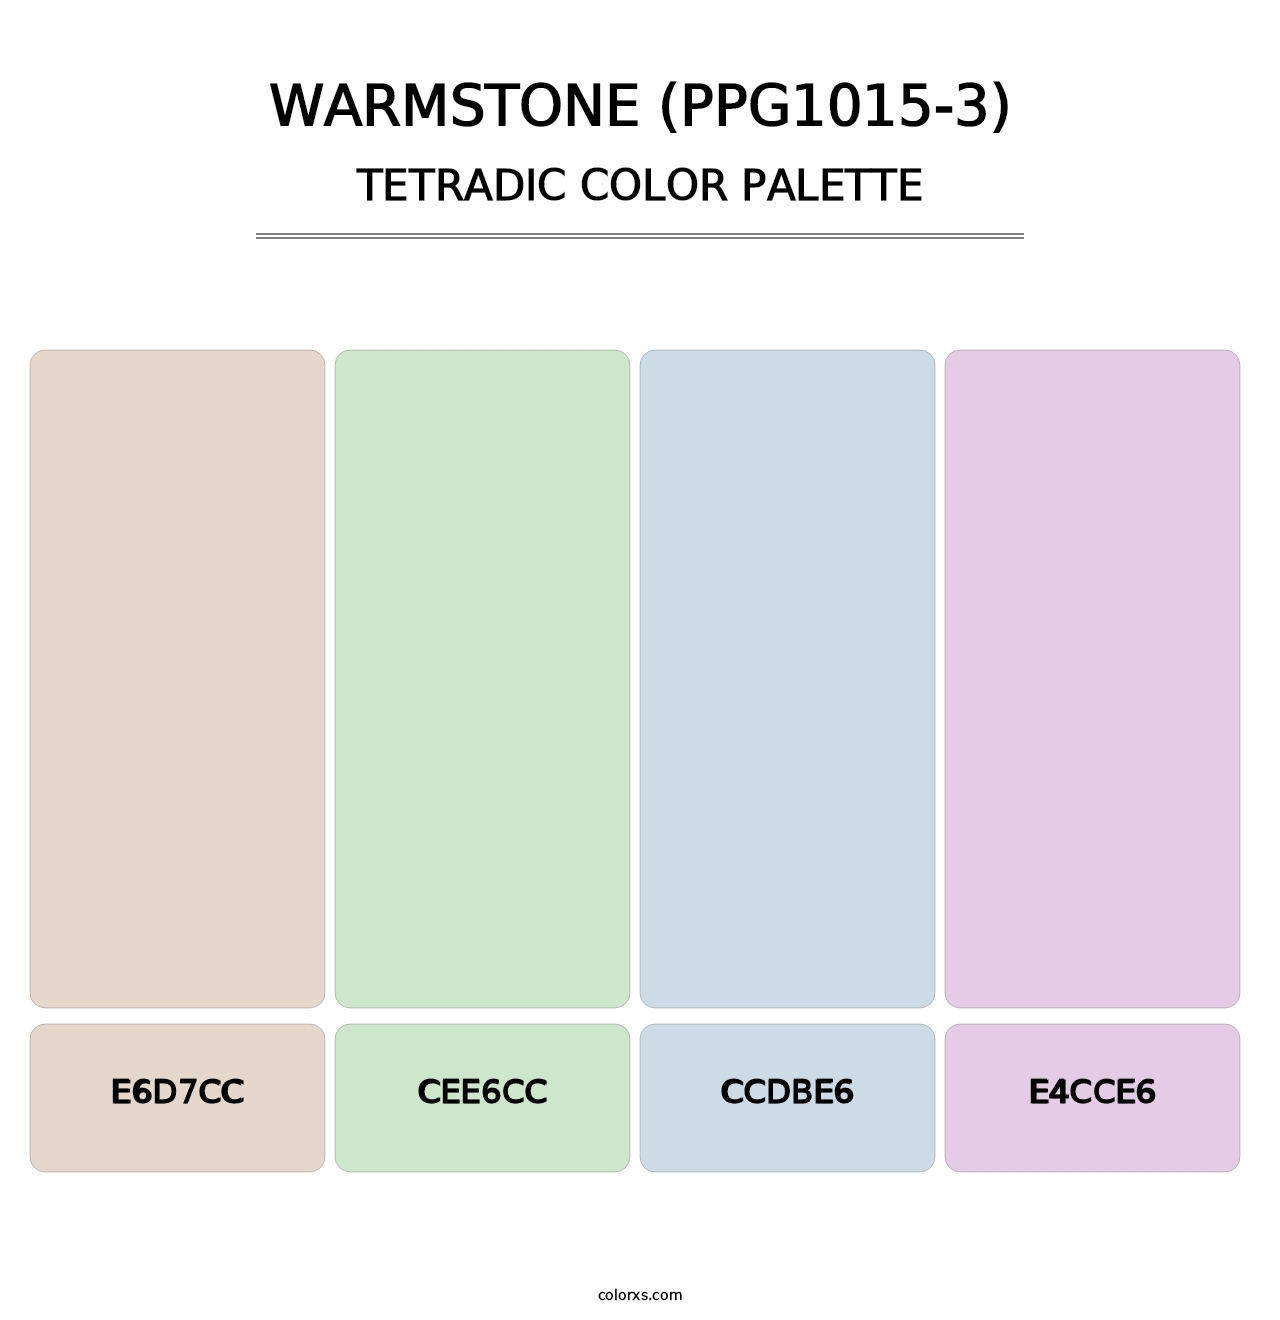 Warmstone (PPG1015-3) - Tetradic Color Palette